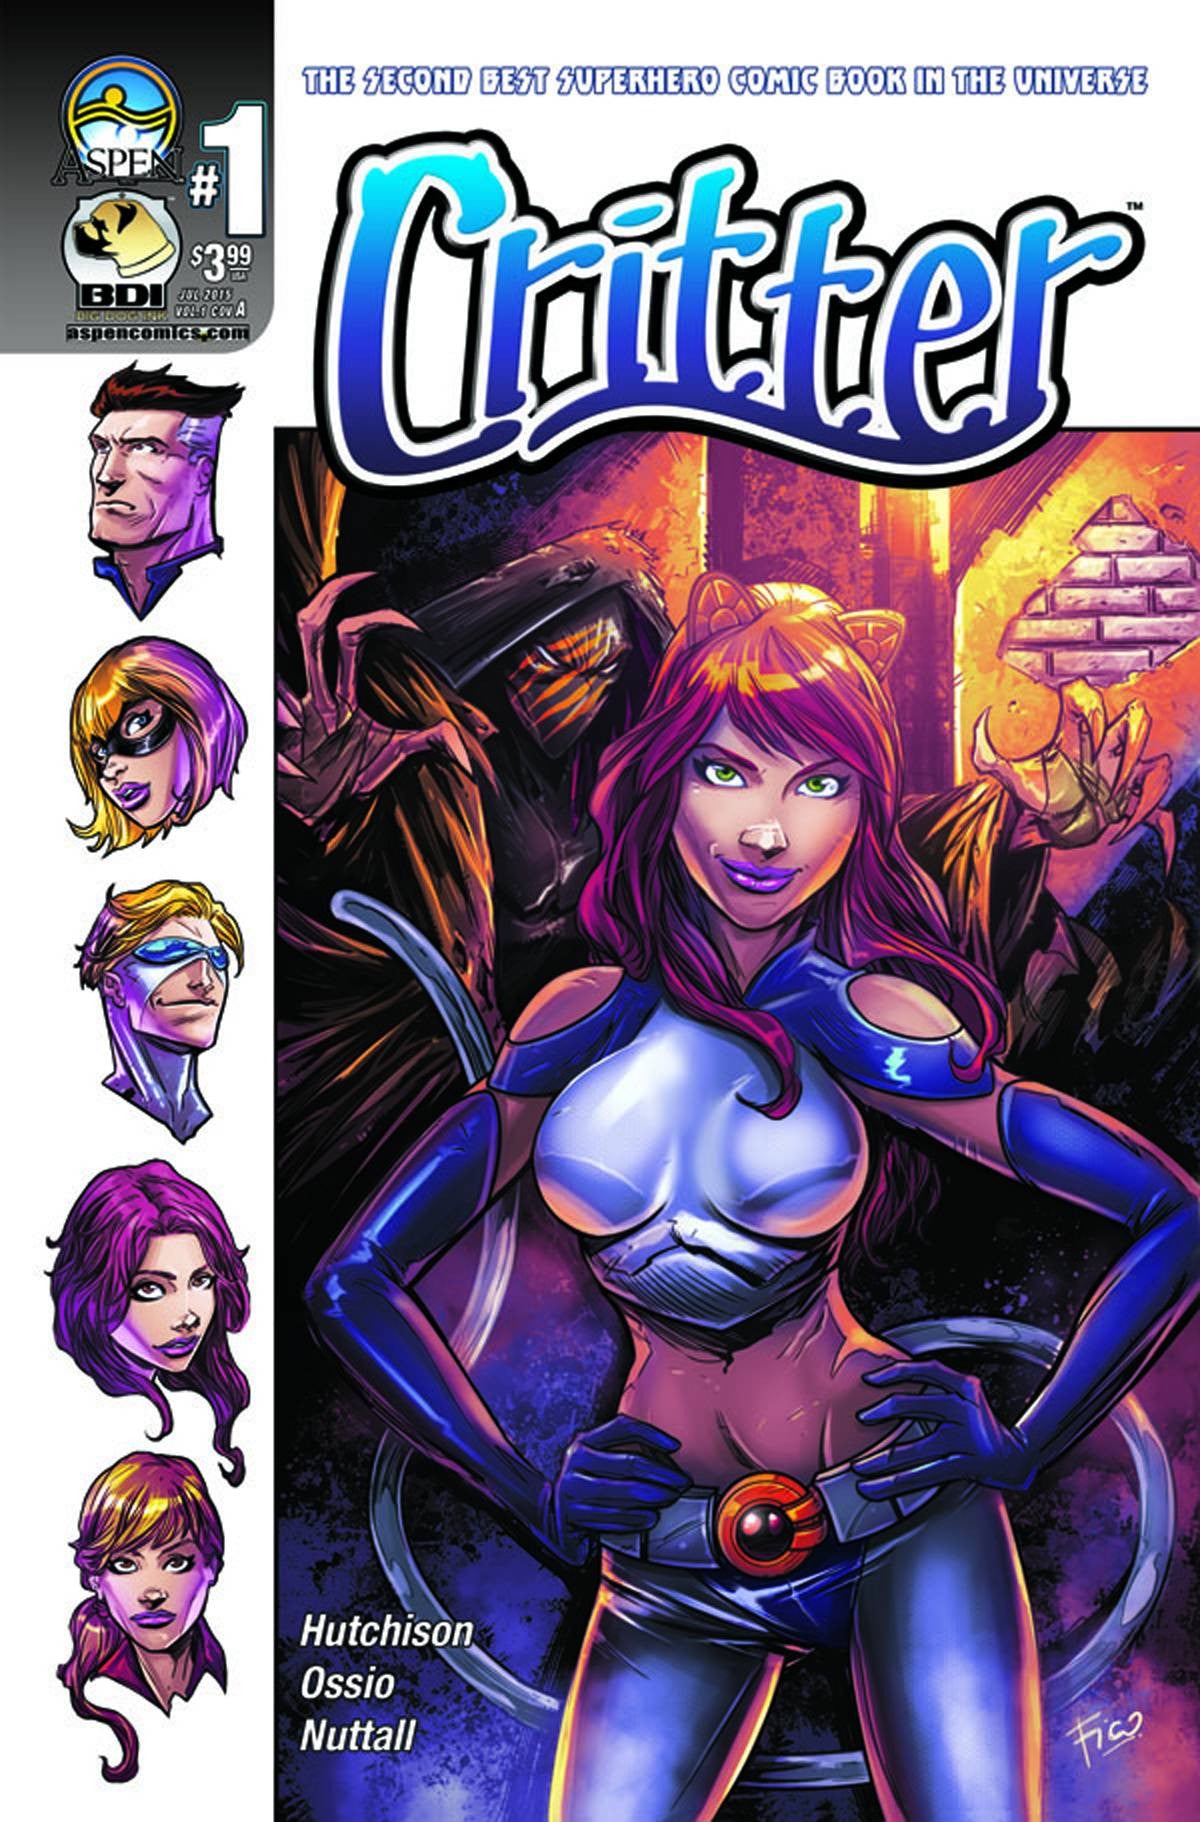 Critter (2015) #1 "Cover A" Variant